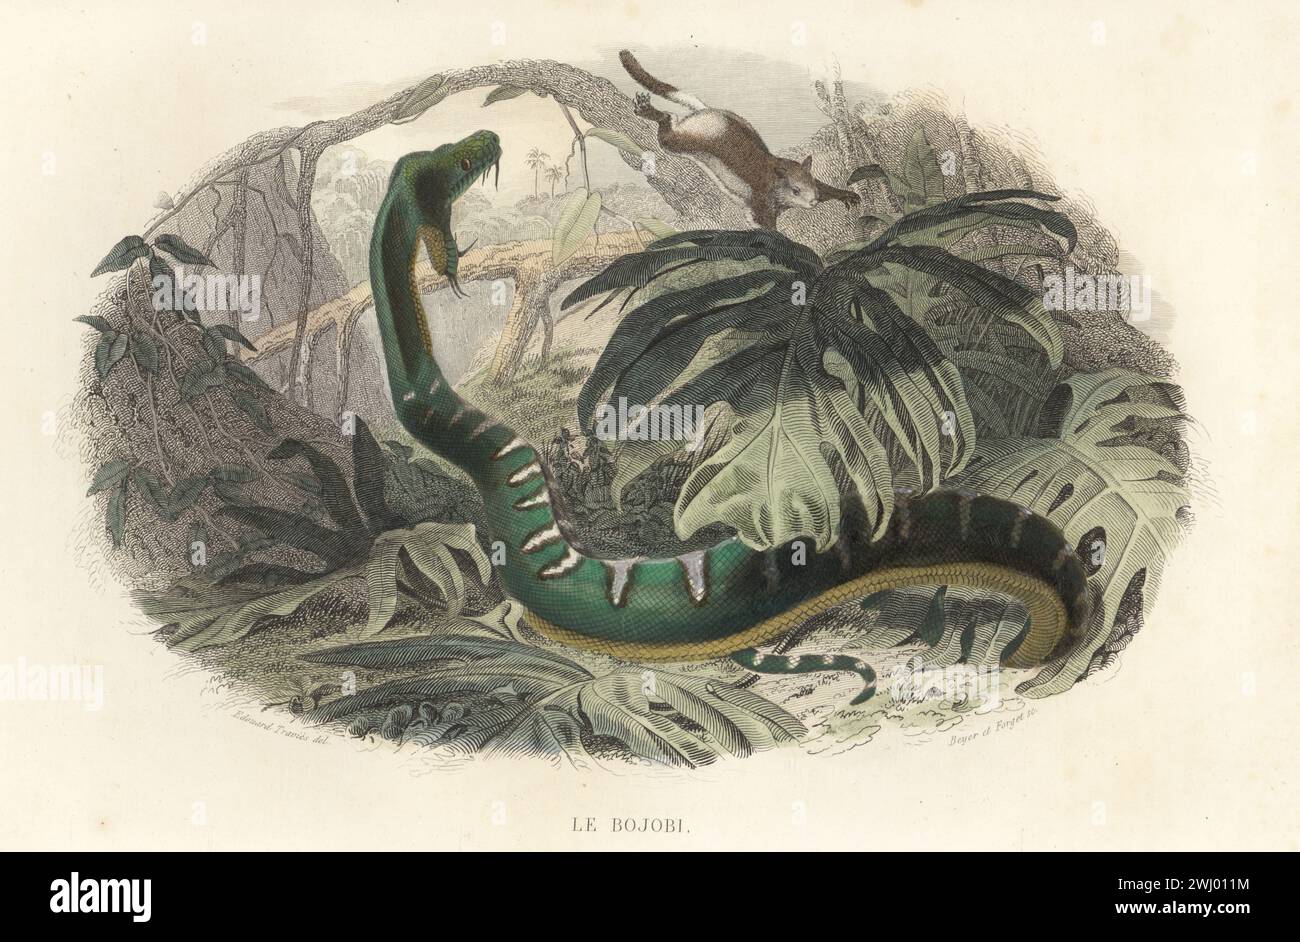 Emerald tree boa, Corallus caninus, about to strike at a rodent. Le bojobi, Boa canina, Boa hypnale, Boa aurantiaca. Handcoloured steel engraving by Charles Beyer and Forget after an illustration by Edouard Travies from Bernard Germain de Lacepede’s Histoire Naturelle de Lacepede, comprenant les cetaces, les quadrupedes ovipares, les serpents et les poissons, Furne et Cie, Paris, 1847. Stock Photo